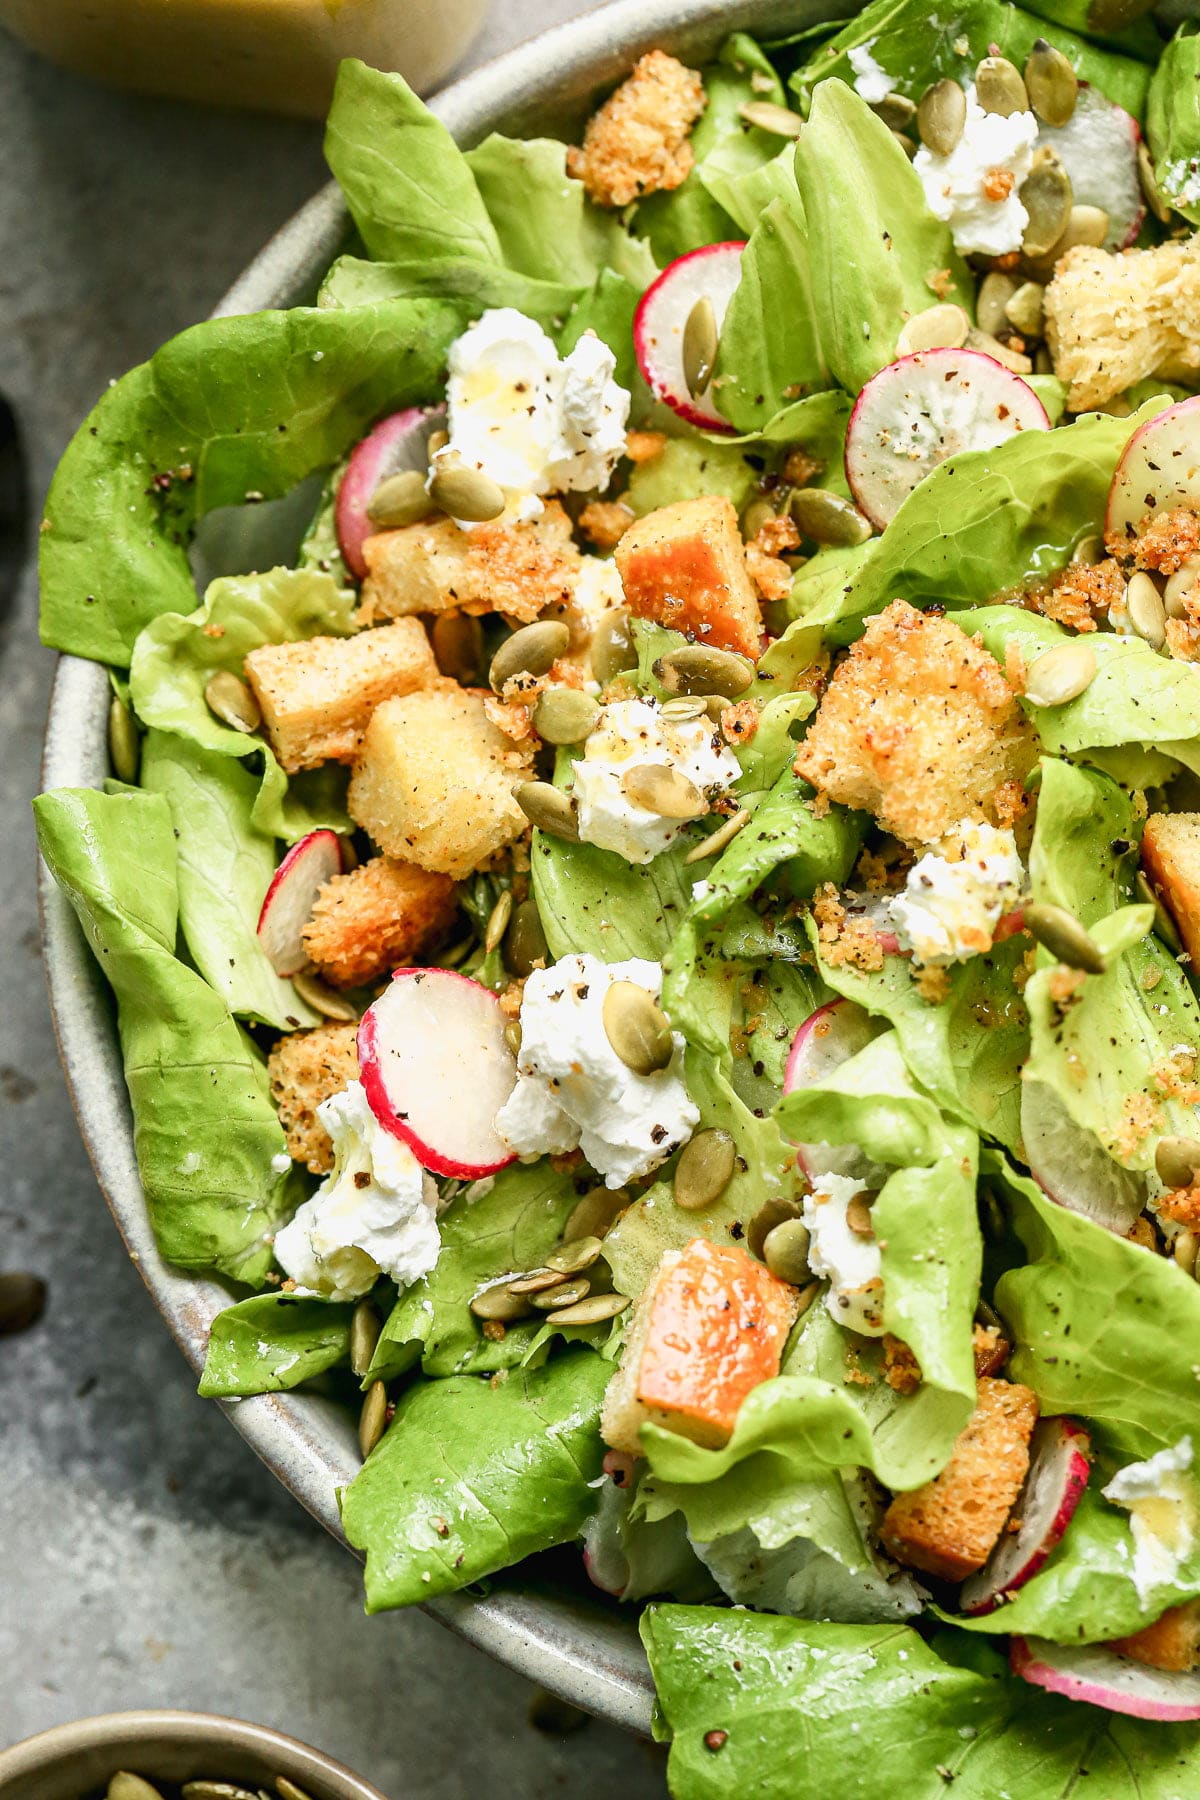 Summer is upon us and so are light, refreshing, seasonal salads. Brimming with homemade croutons, creamy goat cheese, crunchy pepita seeds, and crisp radish, our Butter Lettuce Salad is an easy side dish we come back to time and time again. Prep the dressing and croutons at the beginning of the week and enjoy a little bit every day. 